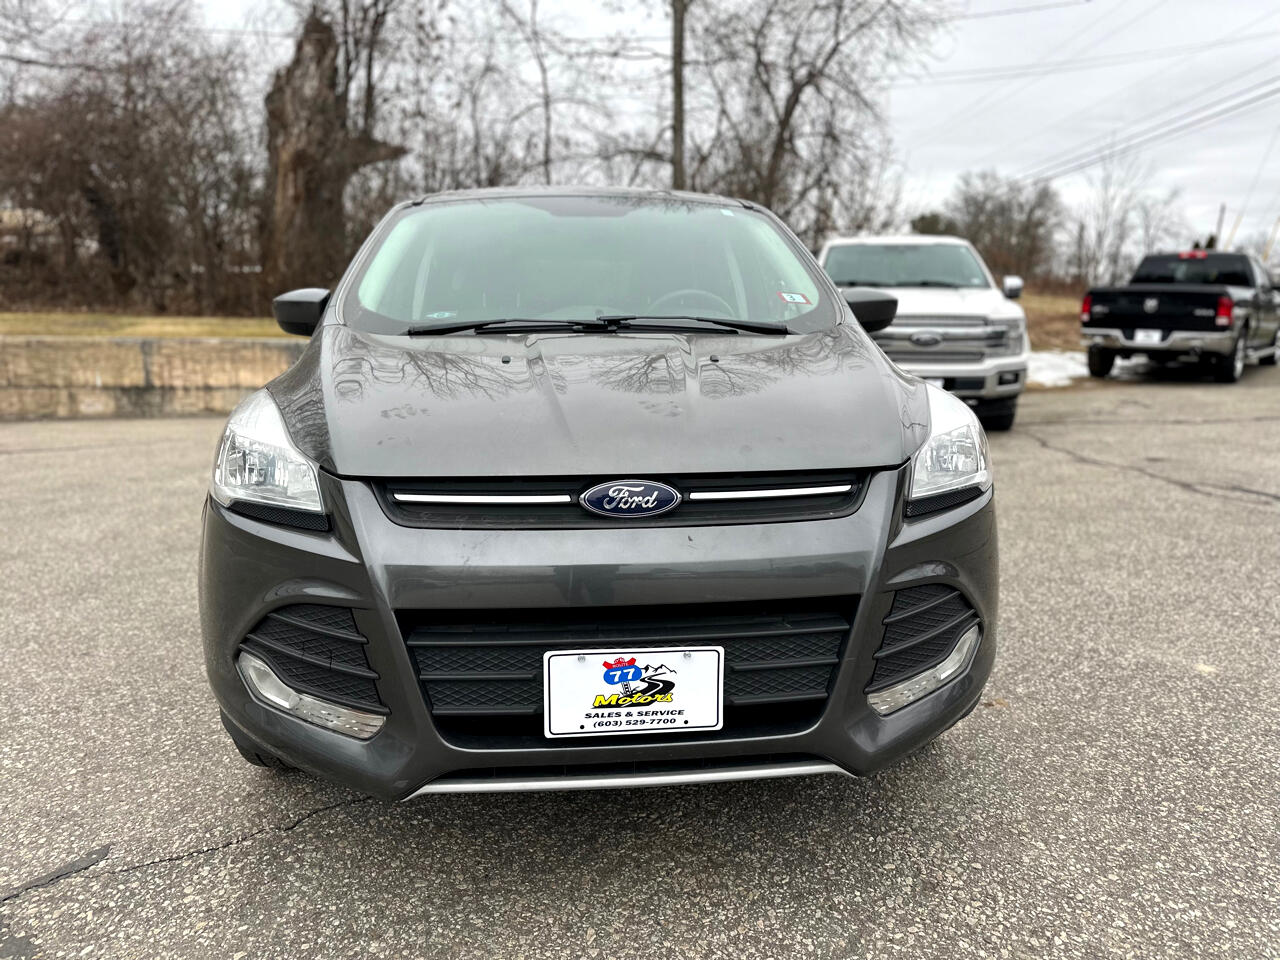 Used 2016 Ford Escape SE with VIN 1FMCU9GX3GUA57543 for sale in Weare, NH